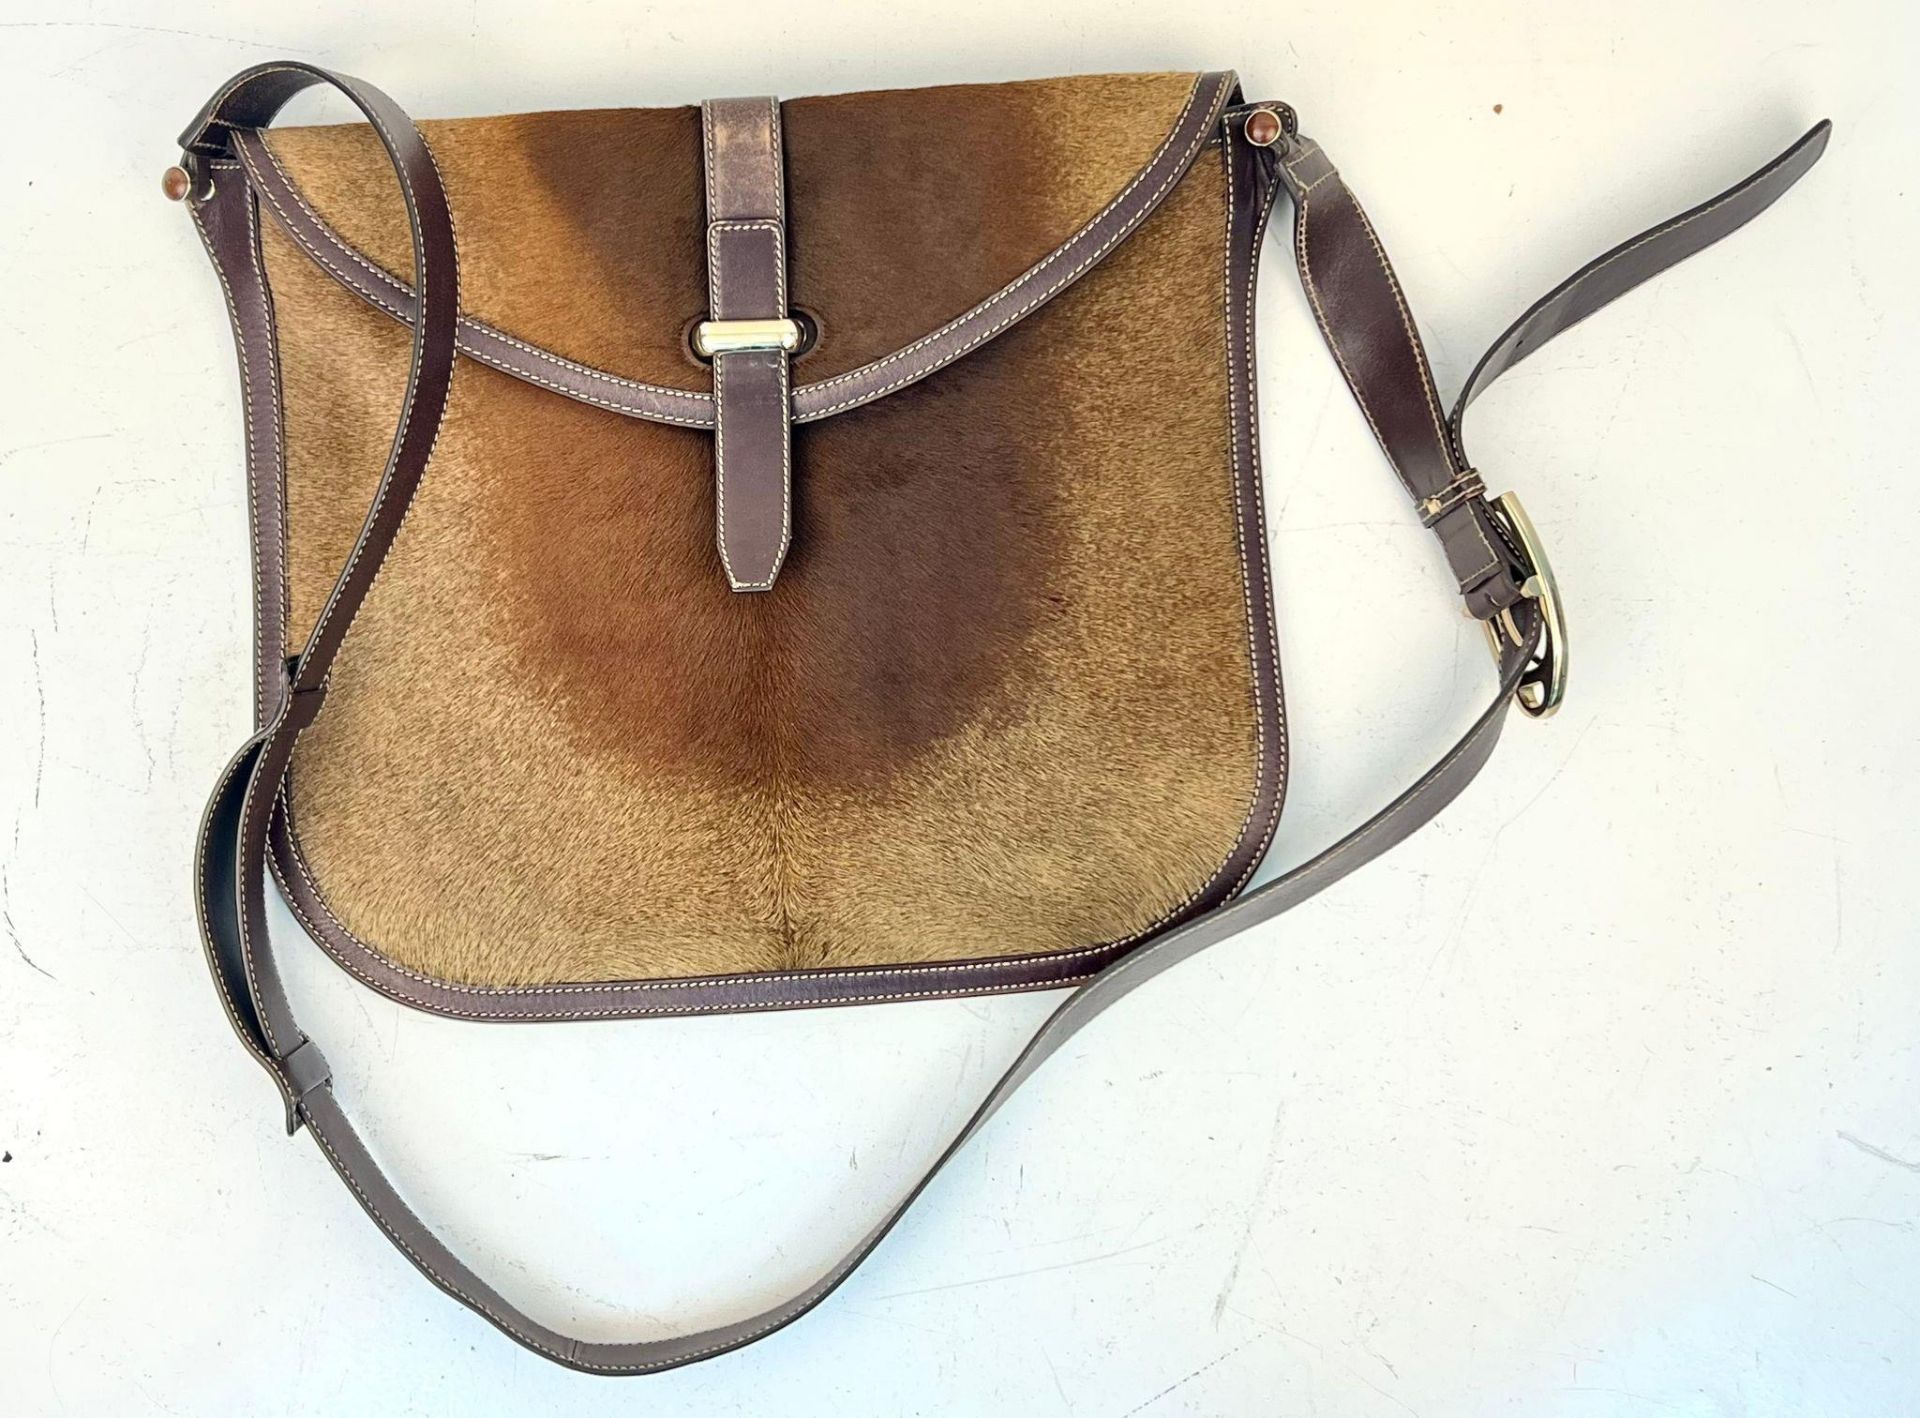 A Gucci Leather and Pony Hair Large Shoulder/Cross-body Bag. Adjustable strap. Gold-tone hardware.